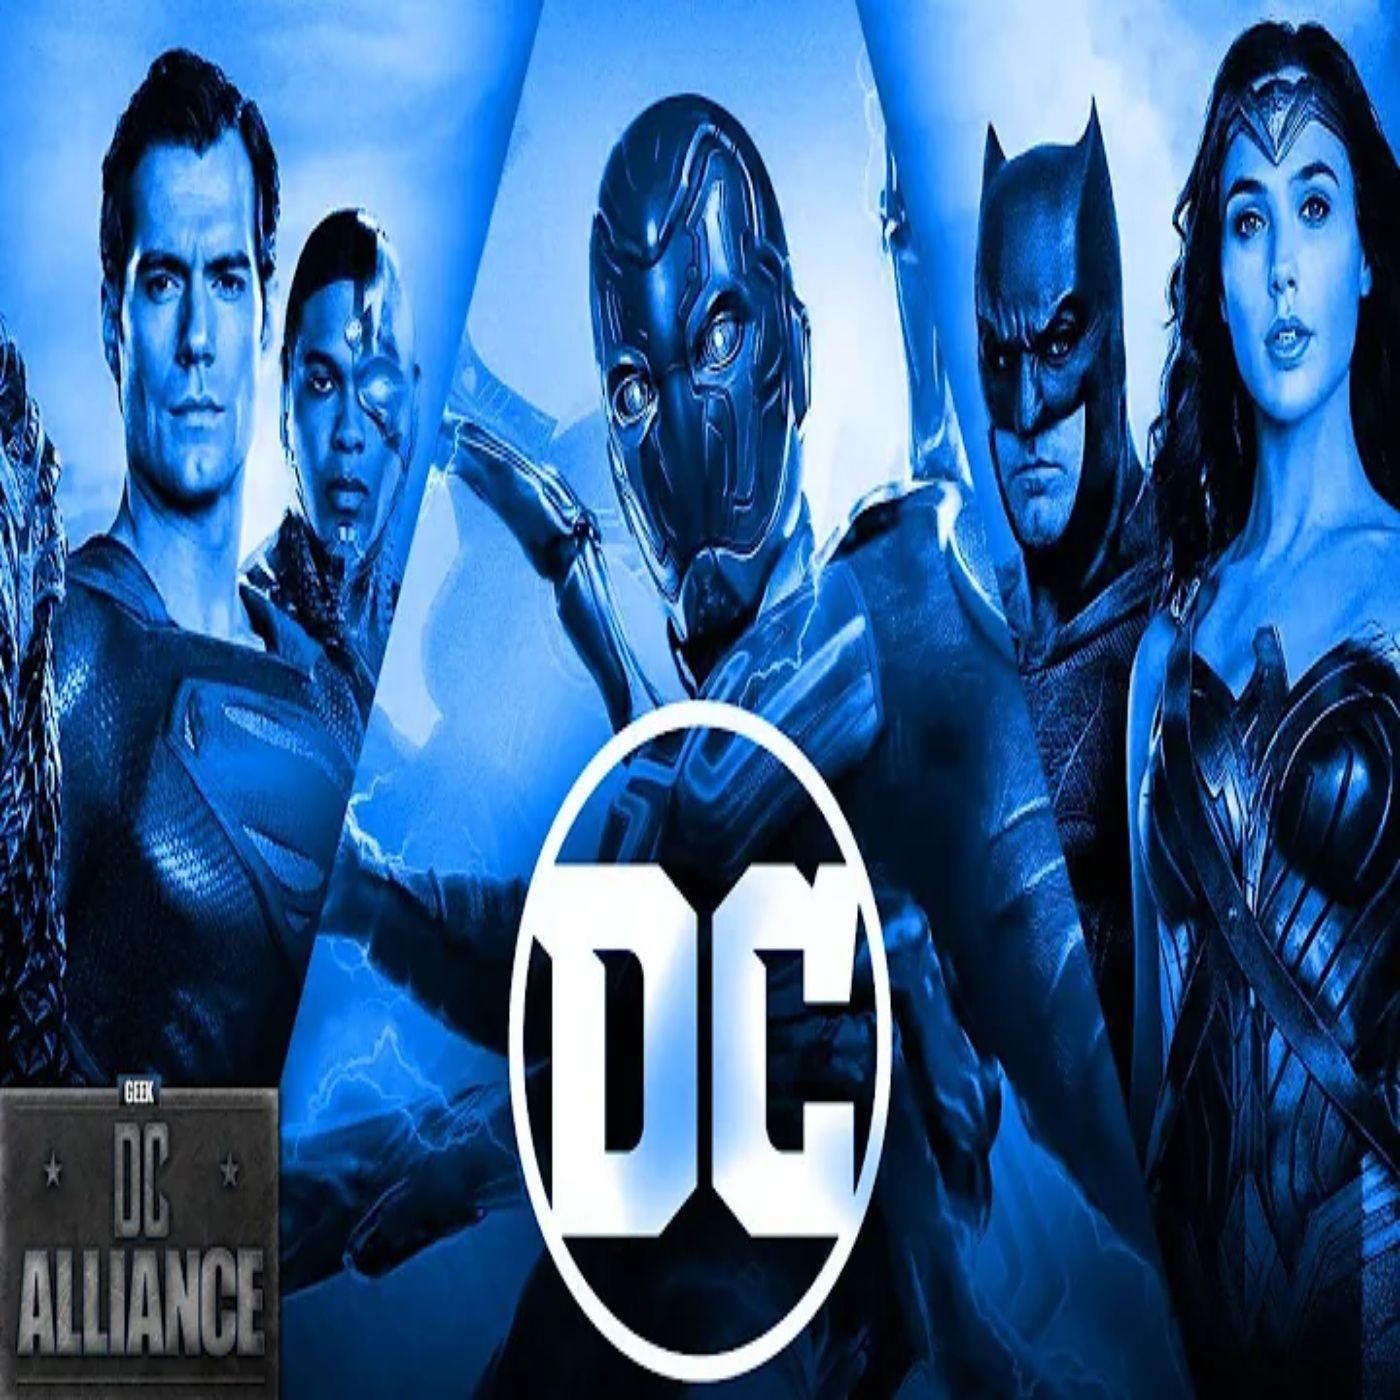 Does DC Has An Image Problem? DC Alliance Chapter 189